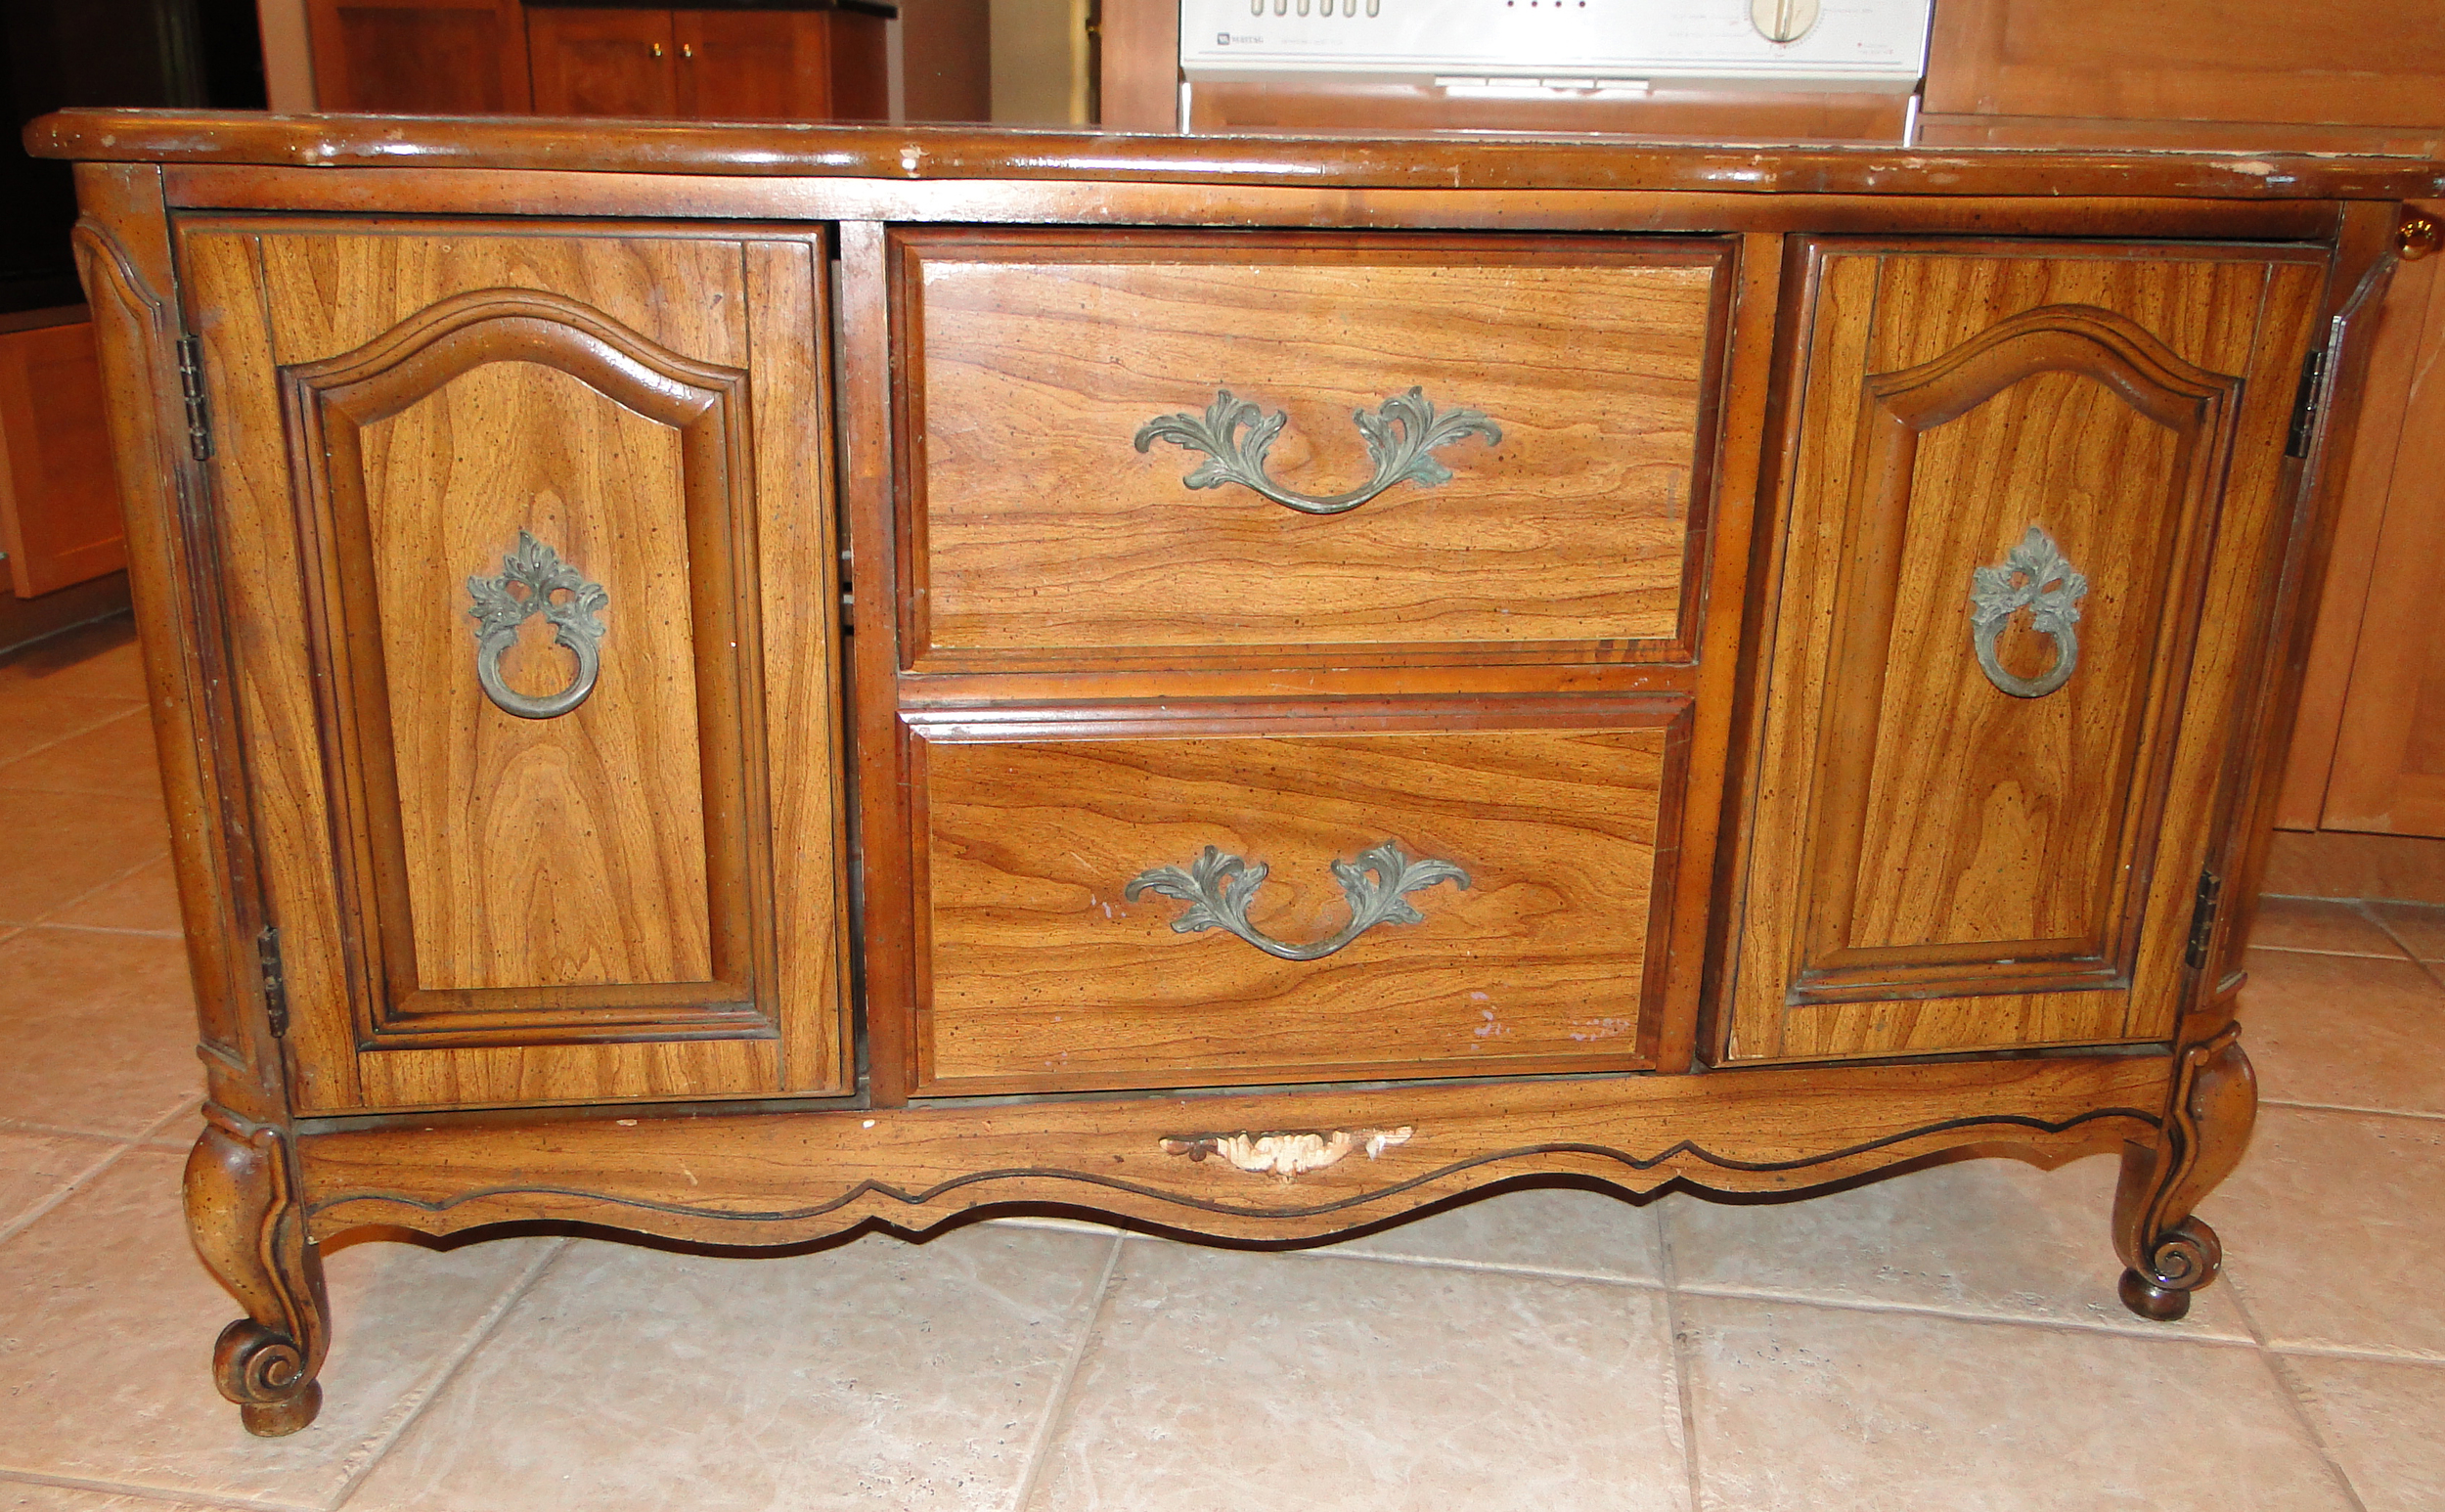 "Before" photo of cabinet